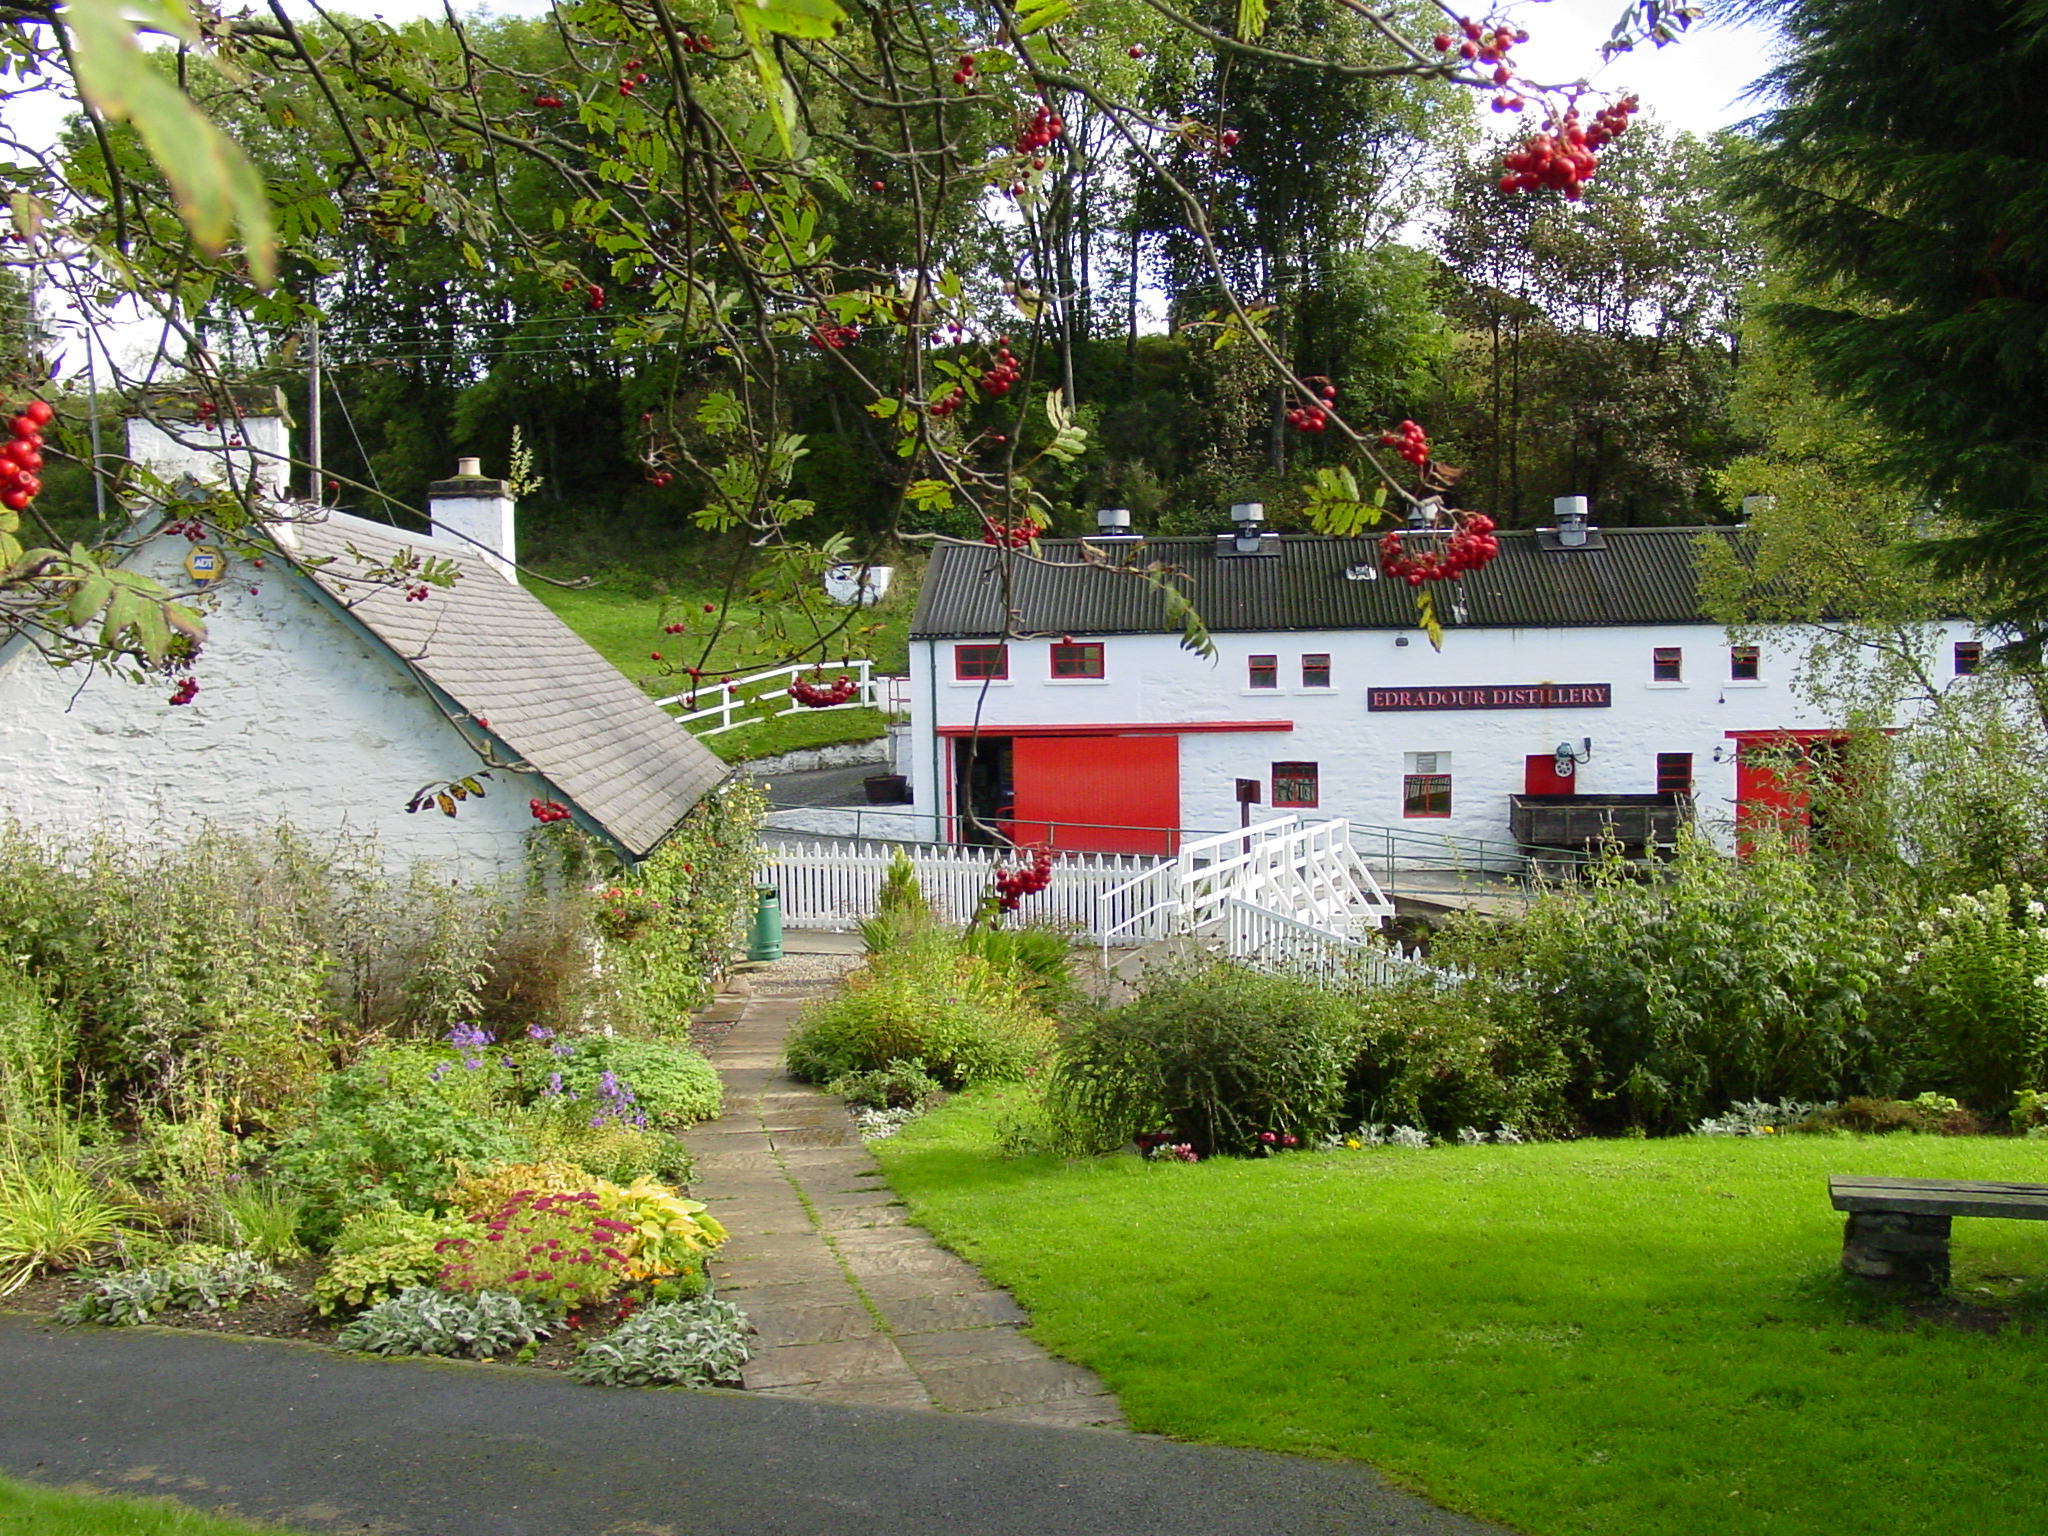 Edradour Distillery is an attraction for visitors in Perthshire.